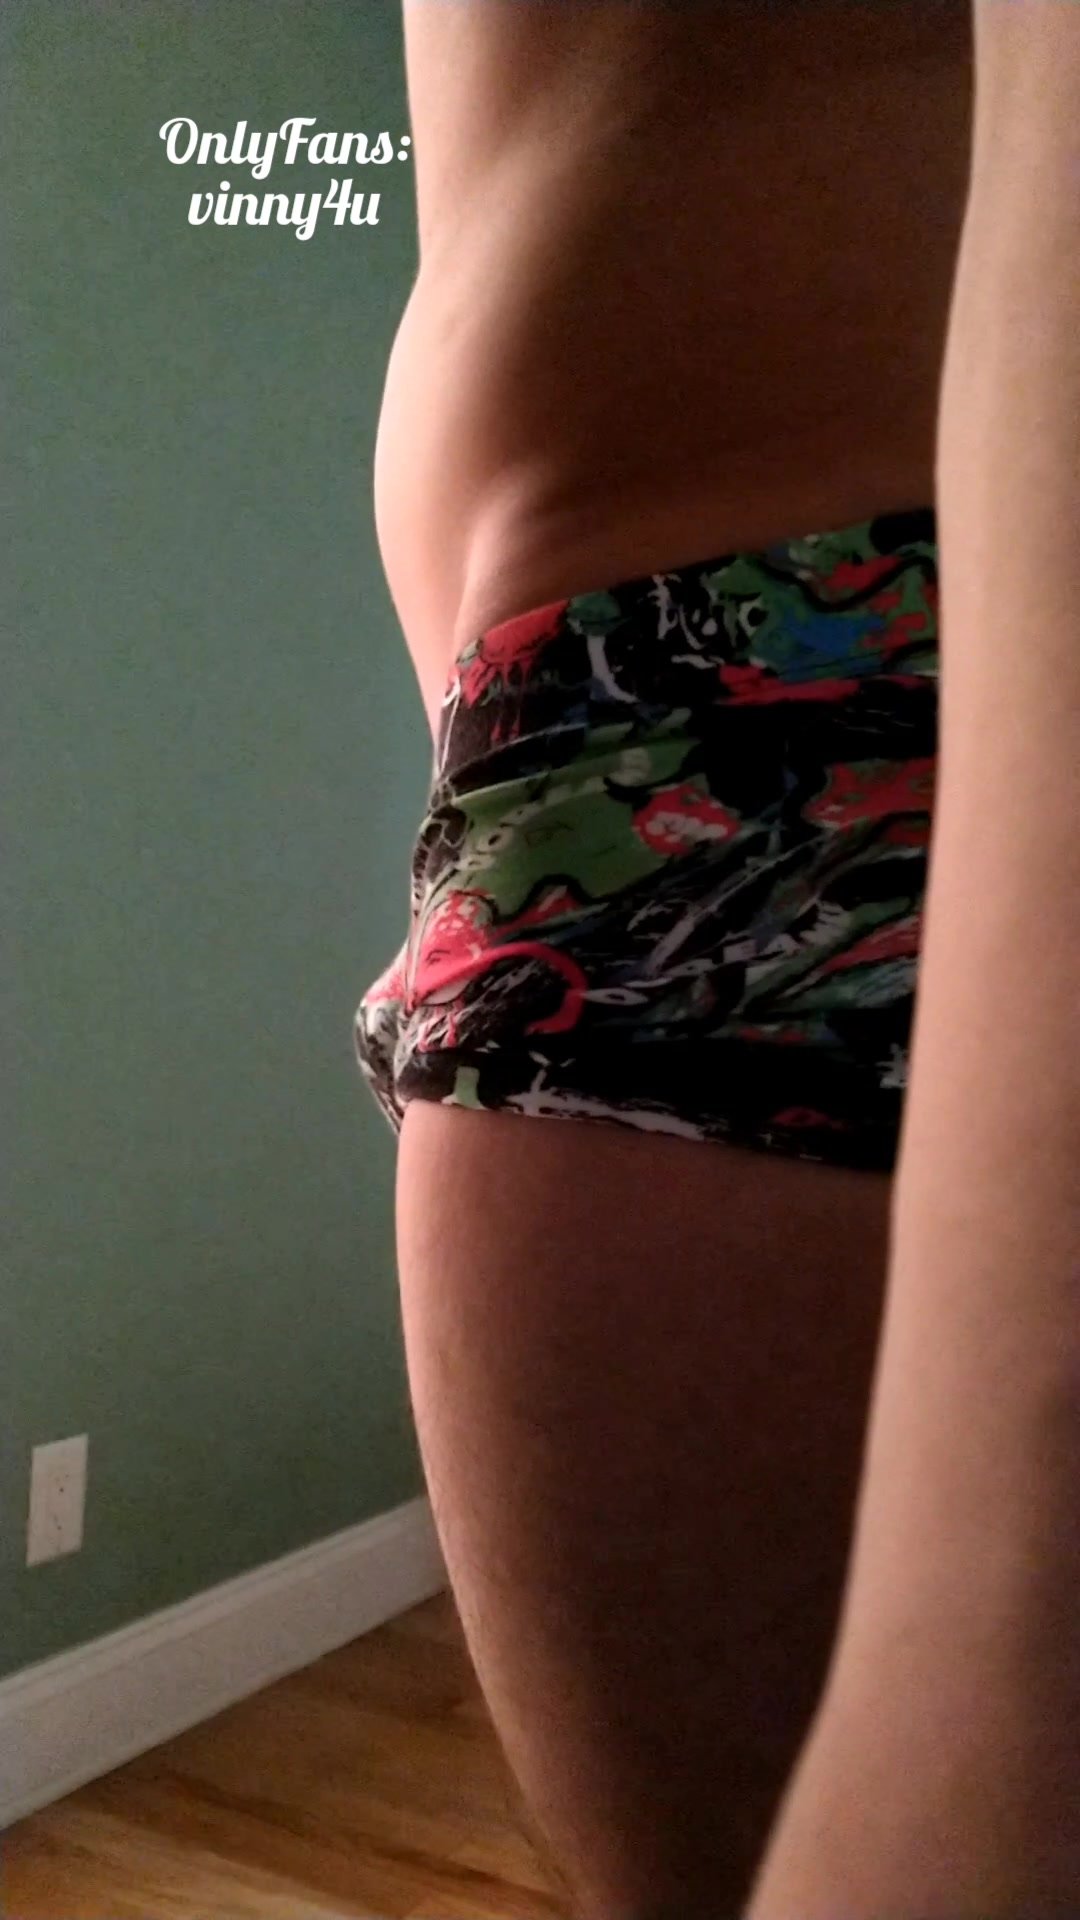 Boy farts in your face POV